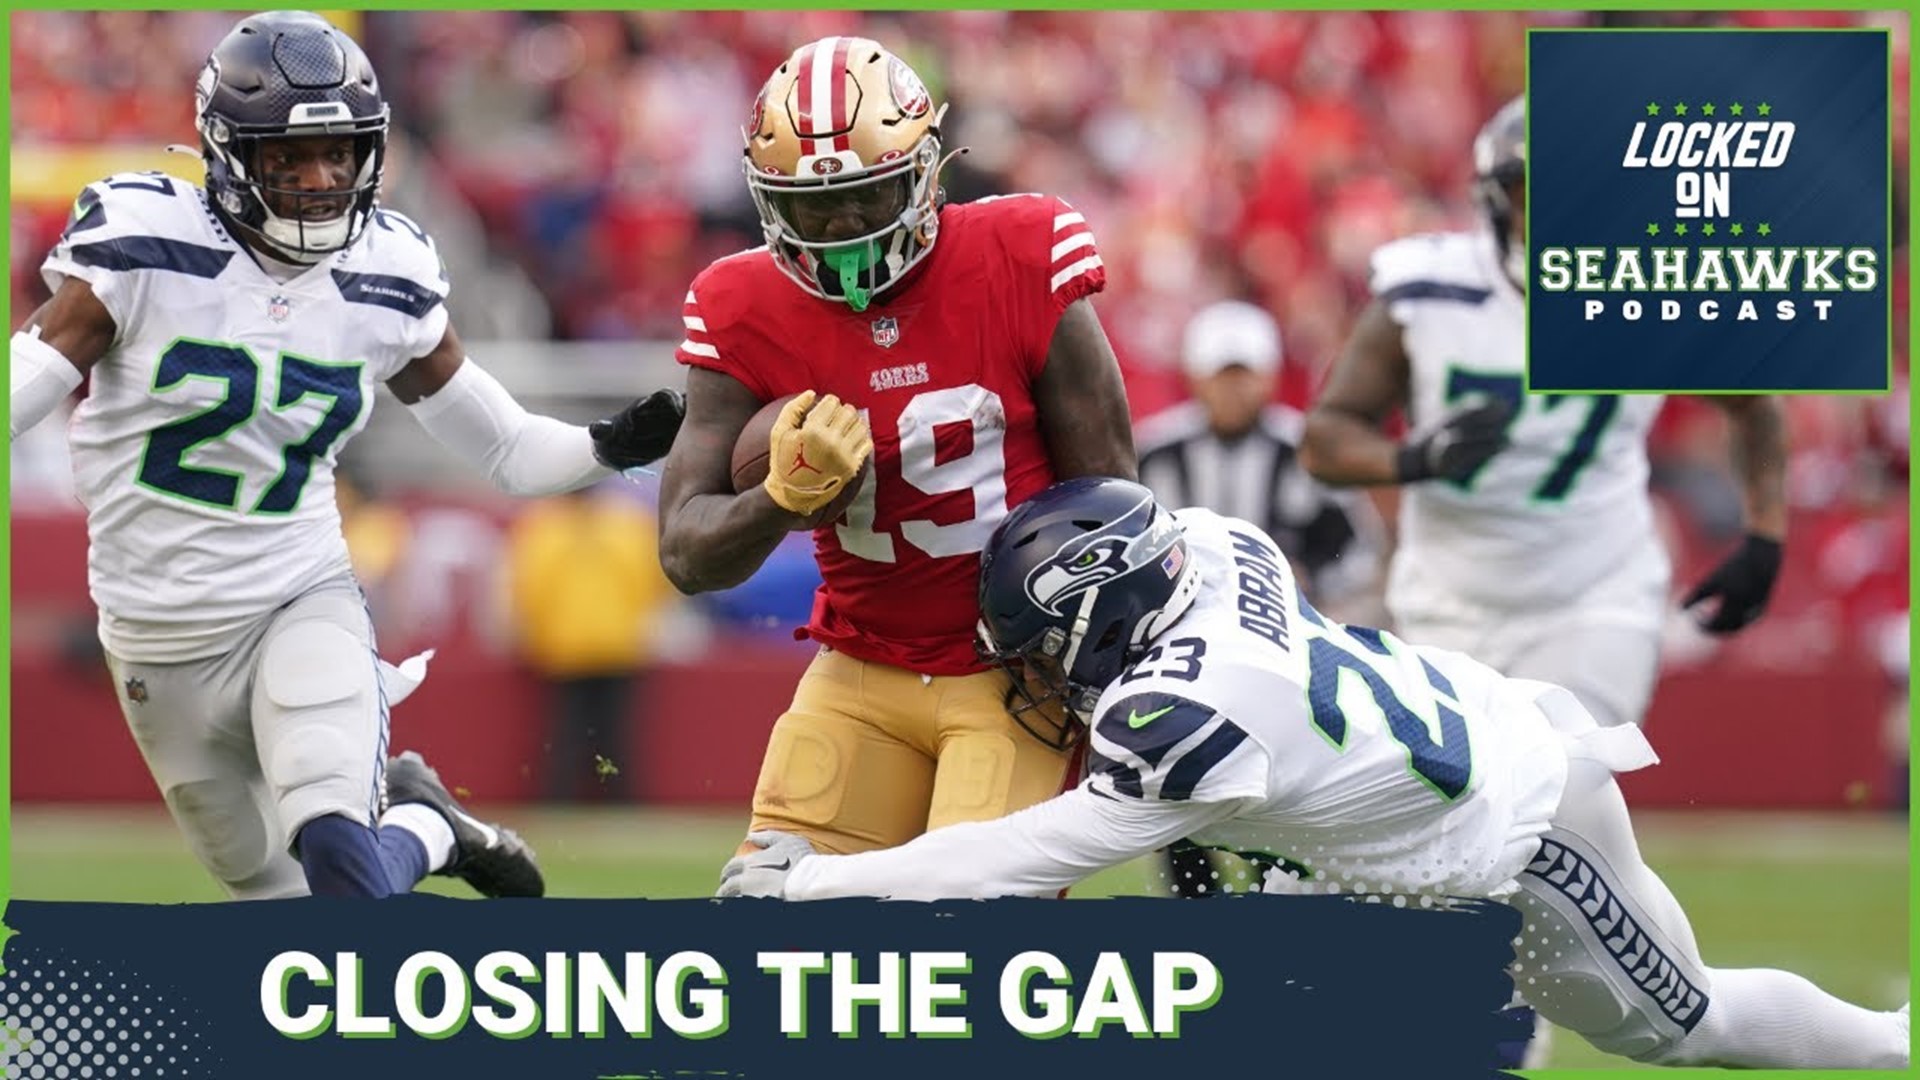 Hosts Corbin Smith and Rob Rang share their initial thoughts on what Seattle must do this offseason to bridge the gap between them and San Francisco in the NFC West.